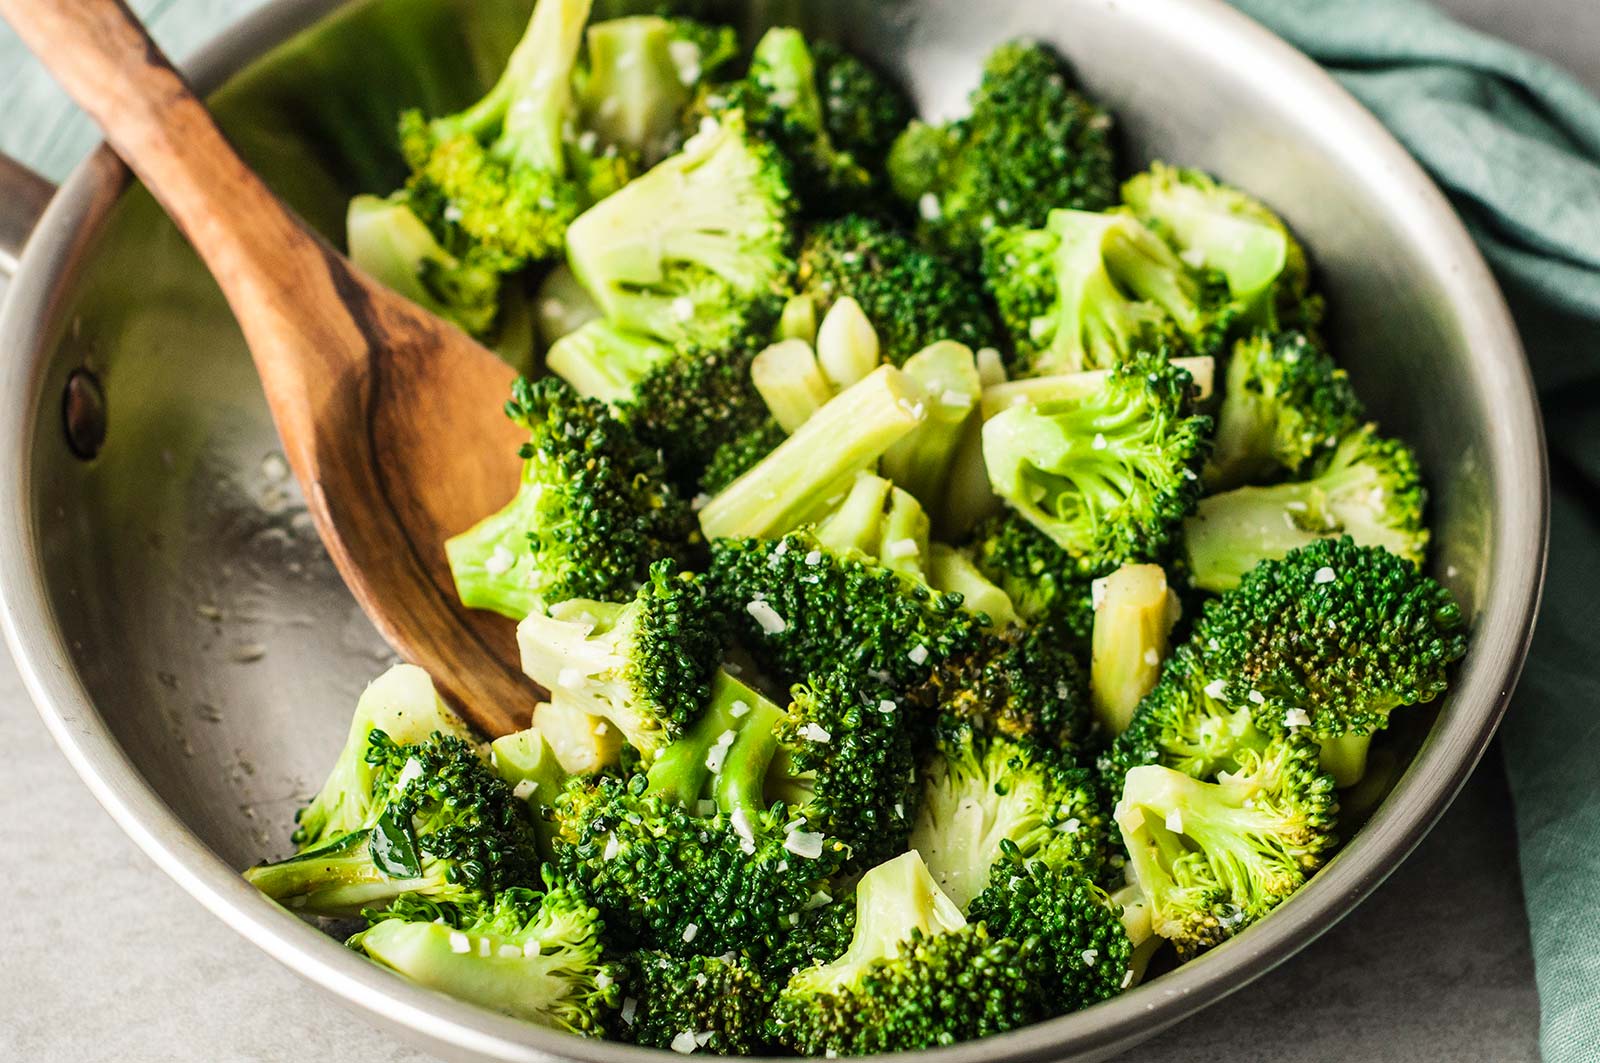 🍅 If You Eat 17/33 of These Foods With Ketchup, Then You’re a Monster Broccoli